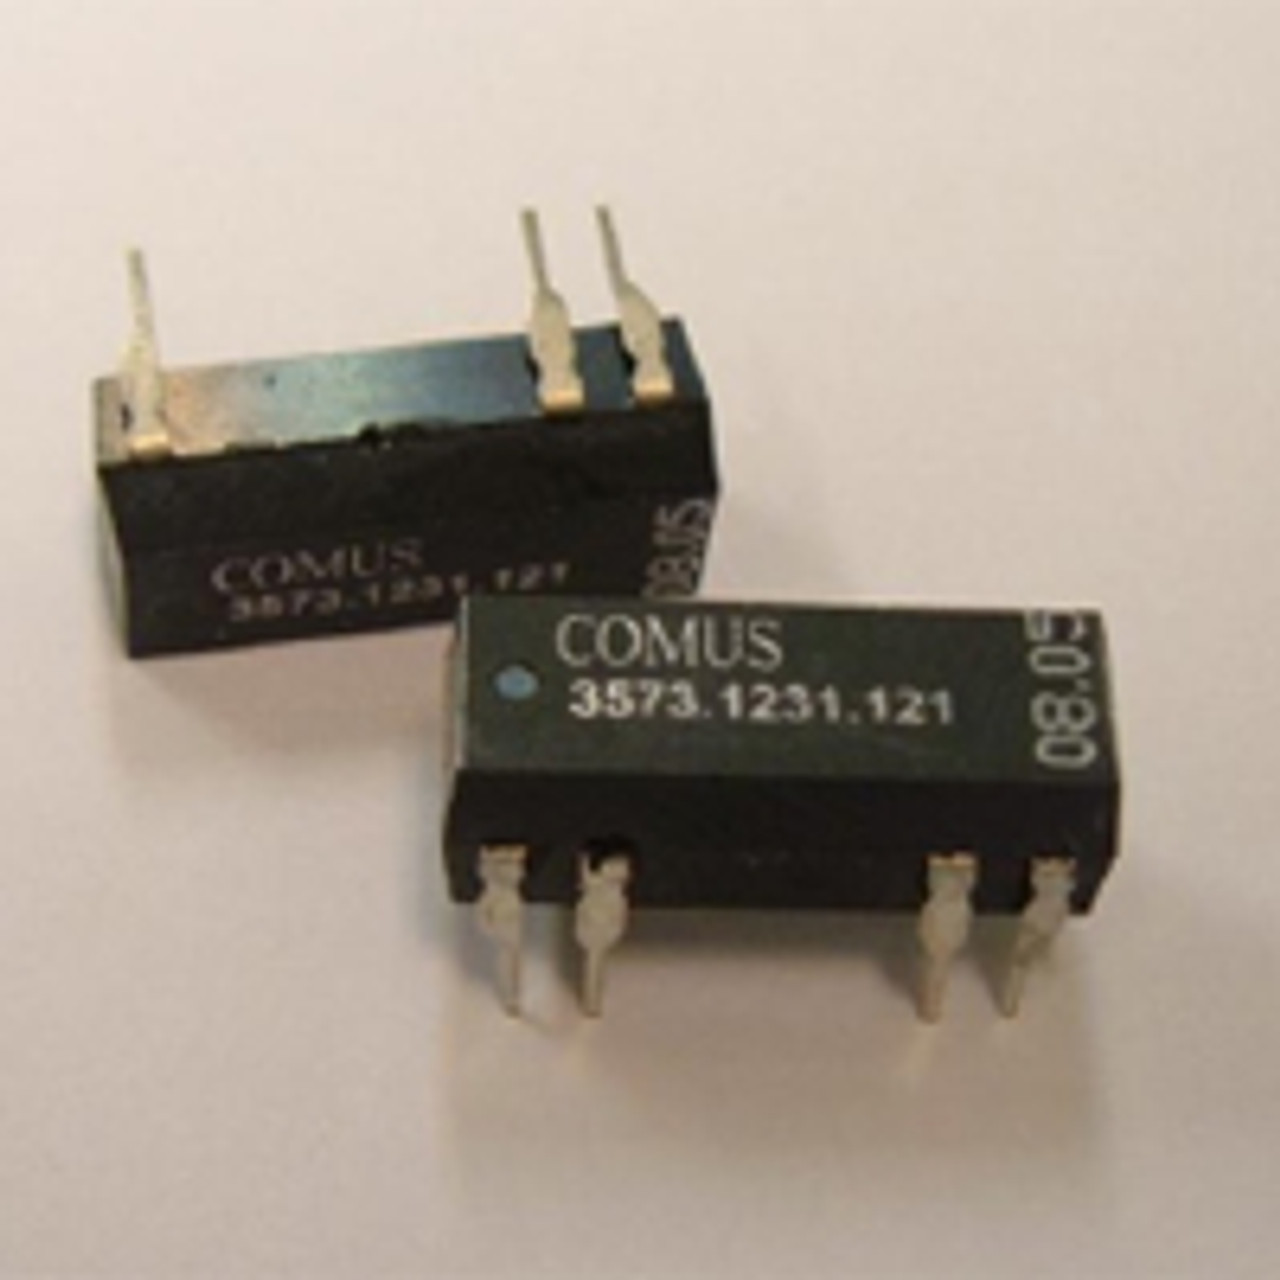 Comus 3573-1231-124 Reed Relays